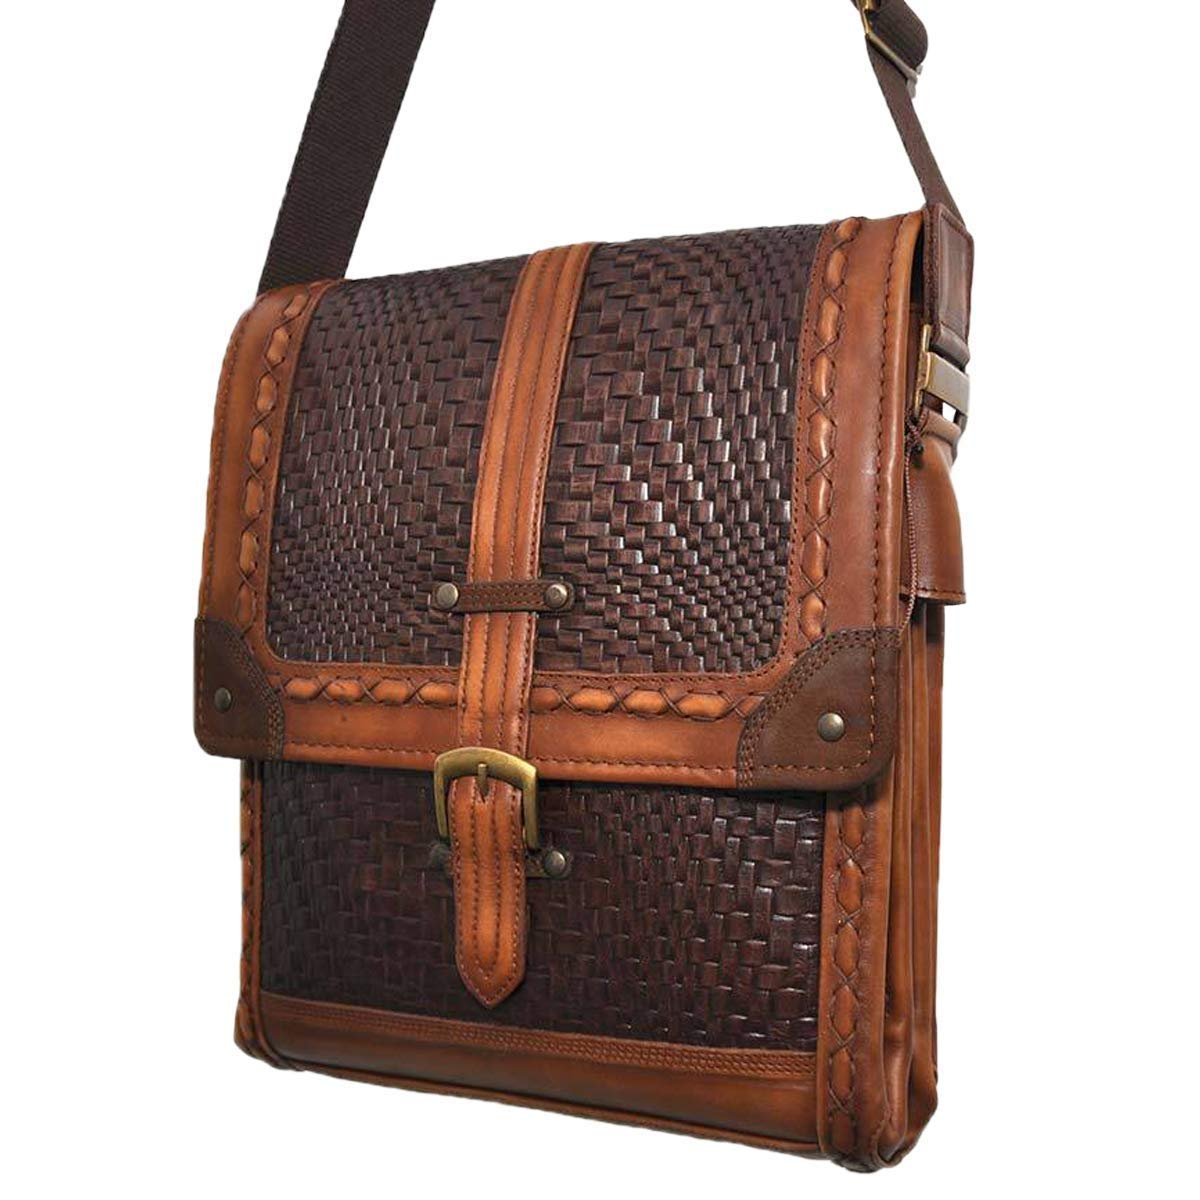 Corral Brown Woven Leather Crossbody Bag - D1146 | eBay